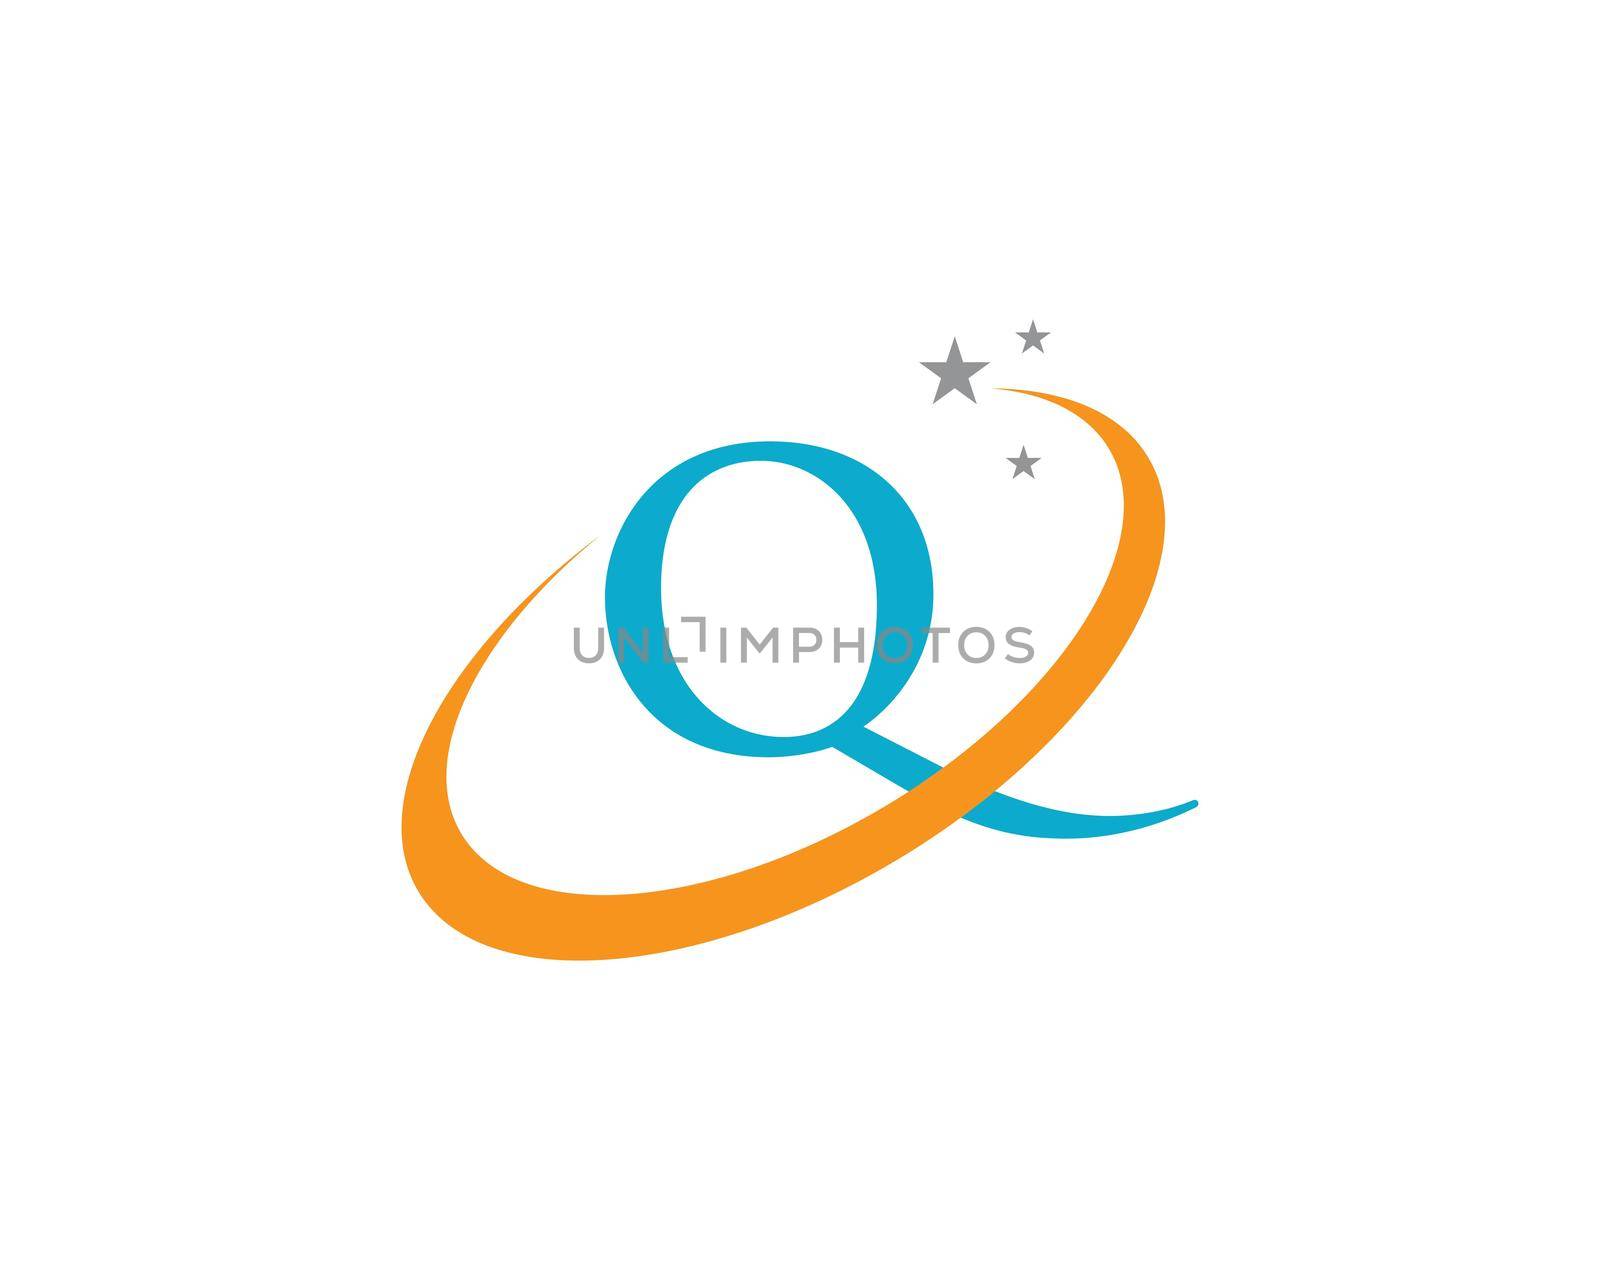 Q Letter Logo Business Template Vector icon